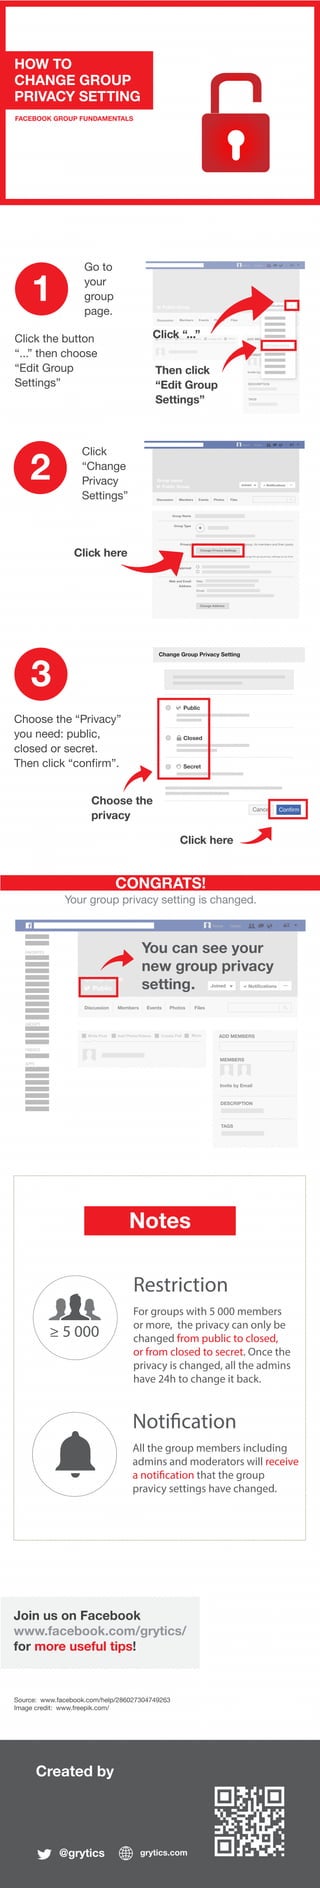 Created by
@grytics grytics.com
Join us on Facebook
www.facebook.com/grytics/
for more useful tips!
HOW TO
CHANGE GROUP
PRIVACY SETTING
FACEBOOK GROUP FUNDAMENTALS
Click the button
“...” then choose
“Edit Group
Settings”
1
2
Choose the “Privacy”
you need: public,
closed or secret.
Then click “confirm”.
3
Click here
FAVORITES
GROUPS
FRIENDS
APPS
Name Home
Group name
Public Joined Notifications ...
Discussion Members Events Photos Files
Write Post Add Photo/Videso Create Poll More ADD MEMBERS
MEMBERS
Invite by Email
DESCRIPTION
TAGS
CONGRATS!
Your group privacy setting is changed.
You can see your
new group privacy
setting.
Source: www.facebook.com/help/286027304749263
Image credit: www.freepik.com/
Grou
Name Home
Public Group Joined Notifications ...
Members Events Photos Files
Add Photo/Videso Create Poll More ADD MEMBERS
MEMBERS
Invite by Email
DESCRIPTION
TAGS
Edit Group Settings
Discussion
Write Post
Go to
your
group
page.
Click “...”
Then click
“Edit Group
Settings”
Name Home
Group name
Public Group Joined Notifications ...
Discussion Members Events Photos Files
Group Name
Privacy
Group Type
Public Group. Anyone can see the group, its members and their posts.
Change Privacy Settings
Groups with fewer than 5,000 members can change the group privacy settings at any time.
Membership Approval
Web and Email
Address
Web:
Email:
Change Address
Click
“Change
Privacy
Settings”
Click here
Change Group Privacy Setting
Public
Closed
Secret
Cancel Confirm
Choose the
privacy
Notes
≥ 5 000
Restriction
For groups with 5 000 members
or more, the privacy can only be
changed from public to closed,
or from closed to secret. Once the
privacy is changed, all the admins
have 24h to change it back.
Notification
All the group members including
admins and moderators will receive
a notification that the group
pravicy settings have changed.
 